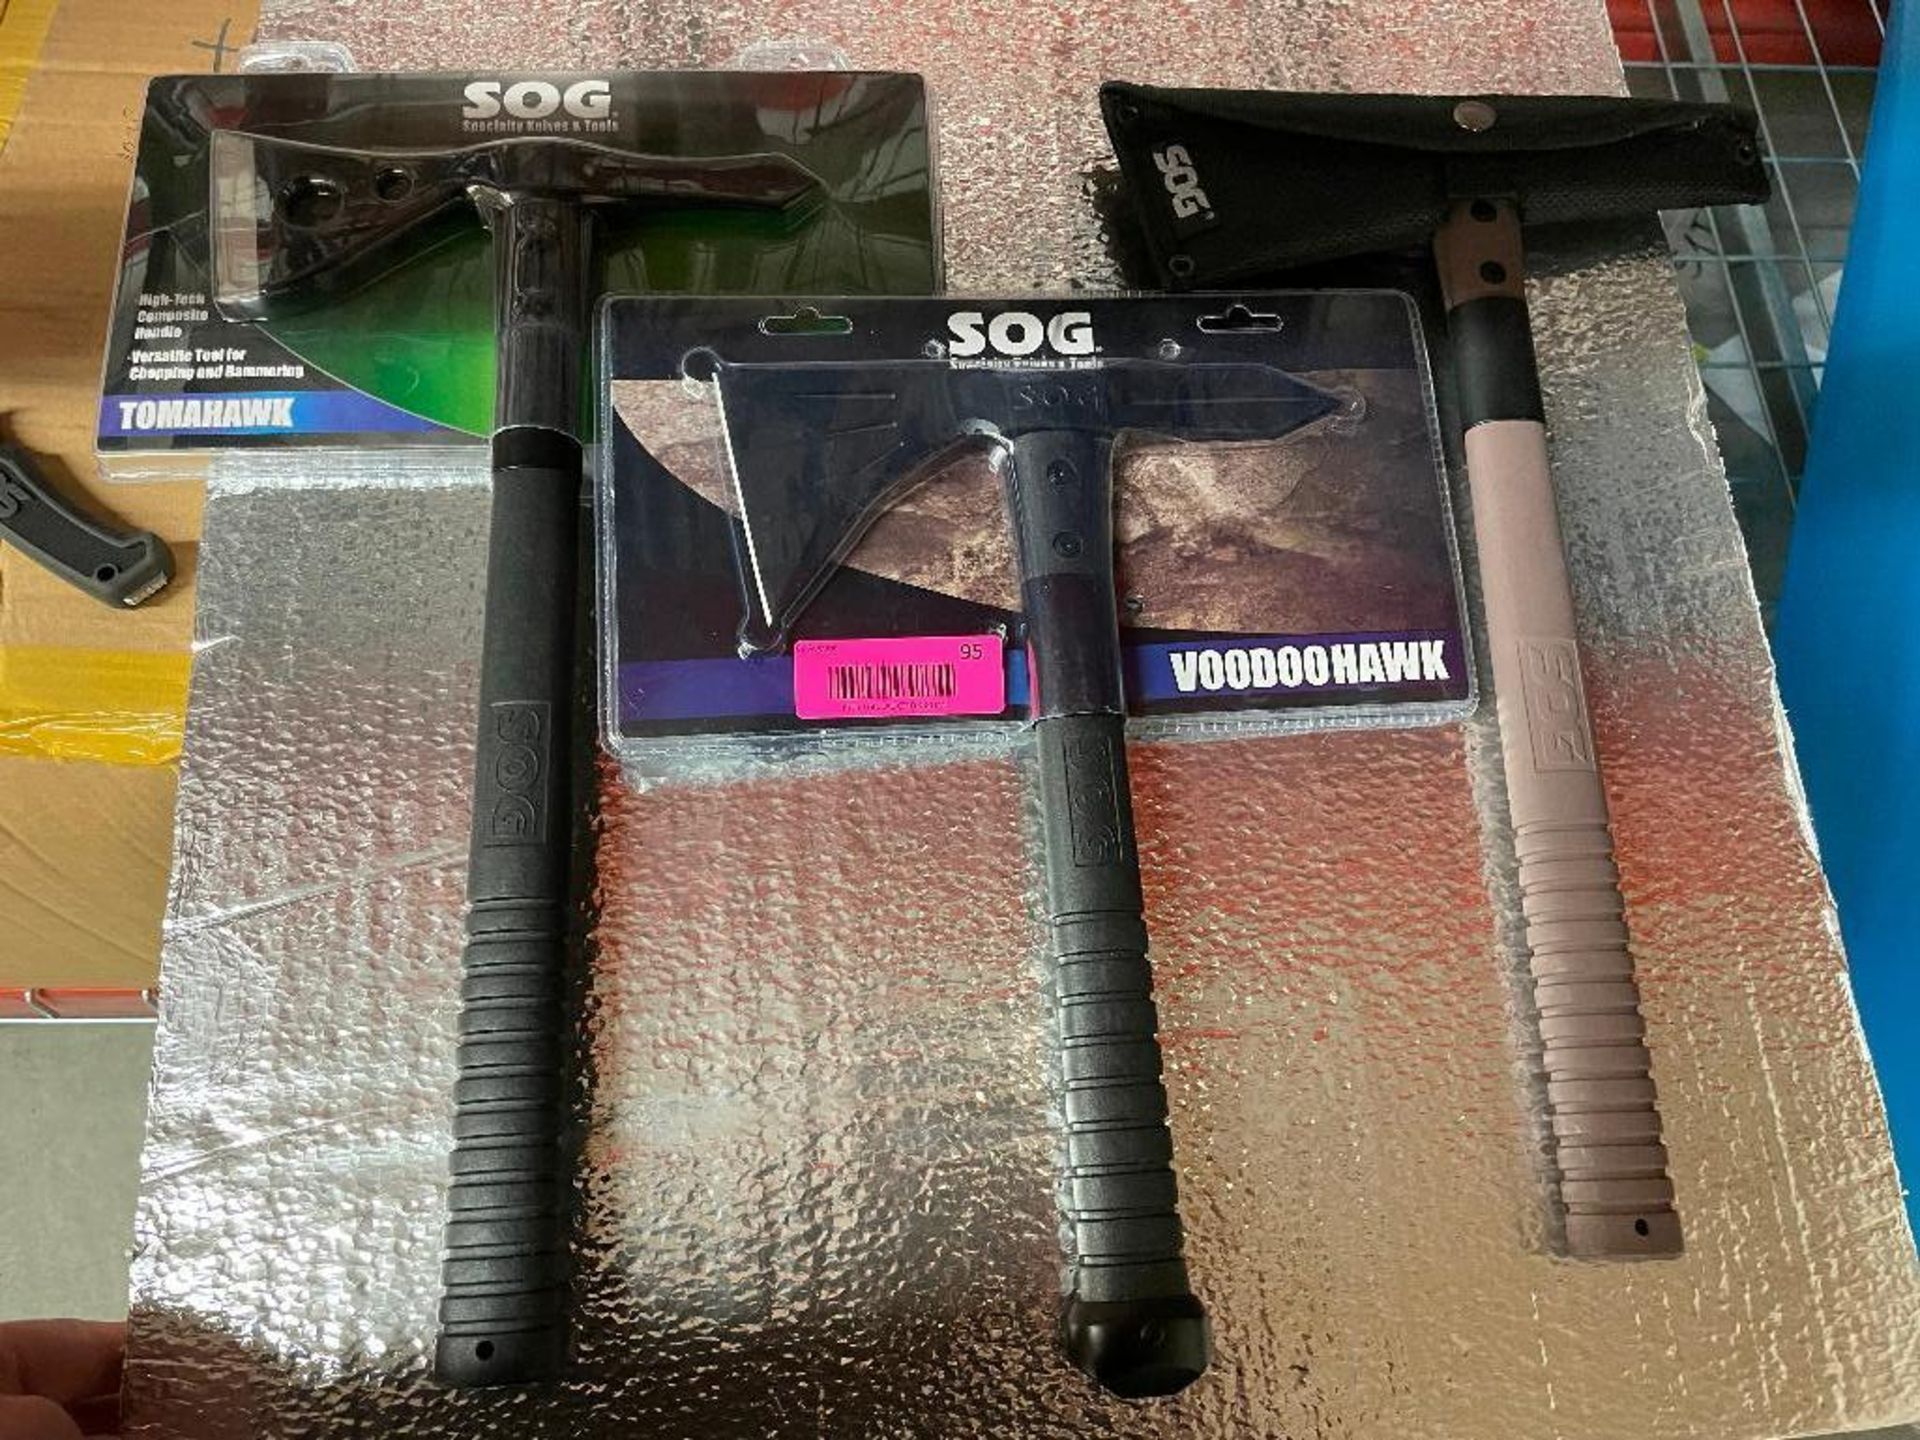 DESCRIPTION: (3) ASSORTED SOG AXES. (2) NEW IN PACKAGING LOCATION: PACKING THIS LOT IS: ONE MONEY QT